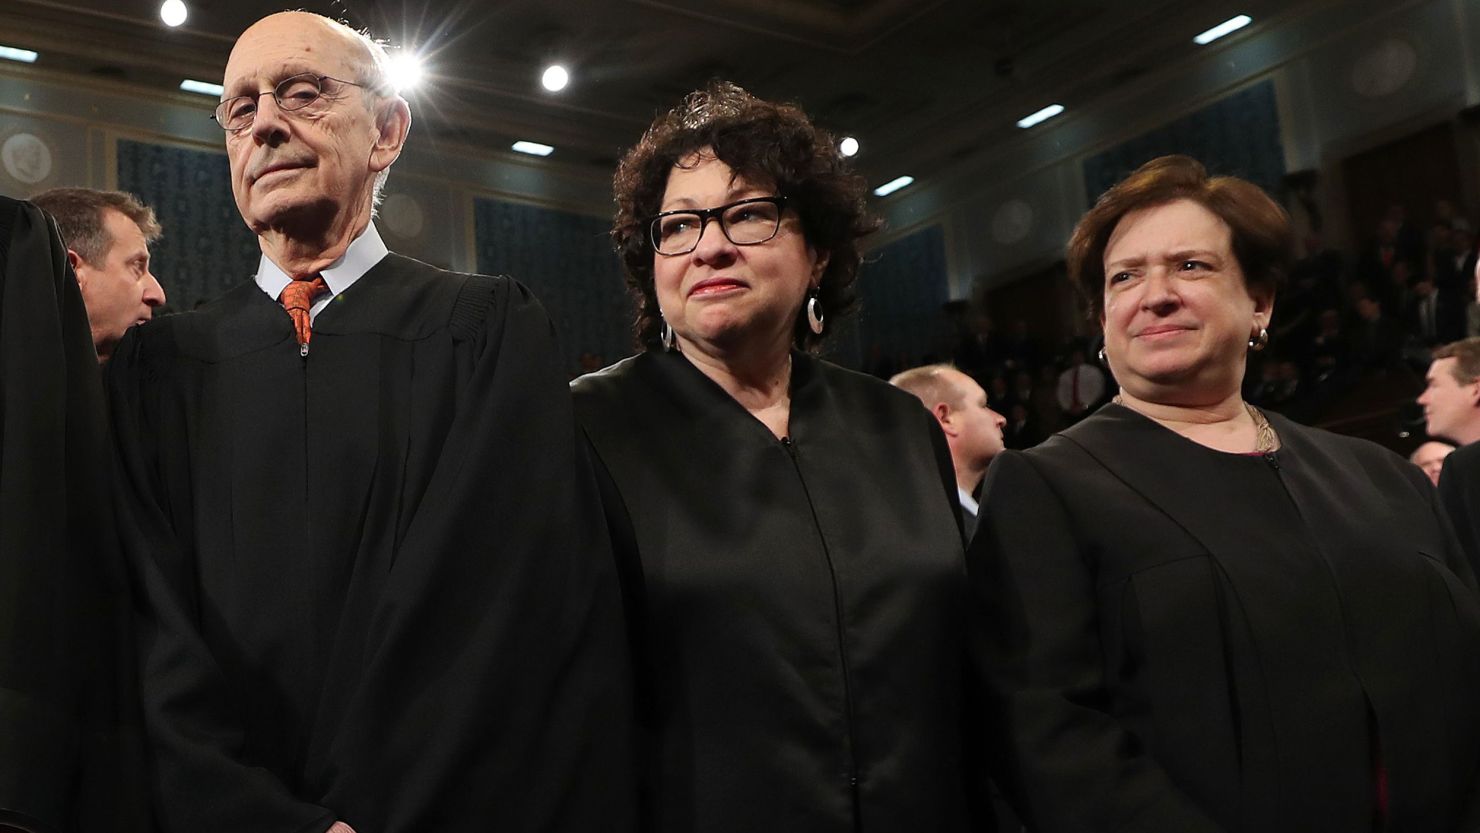 In this February 28, 2017, file photo, Justices Stephen Breyer (from left), Sonia Sotomayor and Elena Kagan arrive for President Donald Trump's first address to a joint session of Congress from the floor of the House of Representatives in Washington.